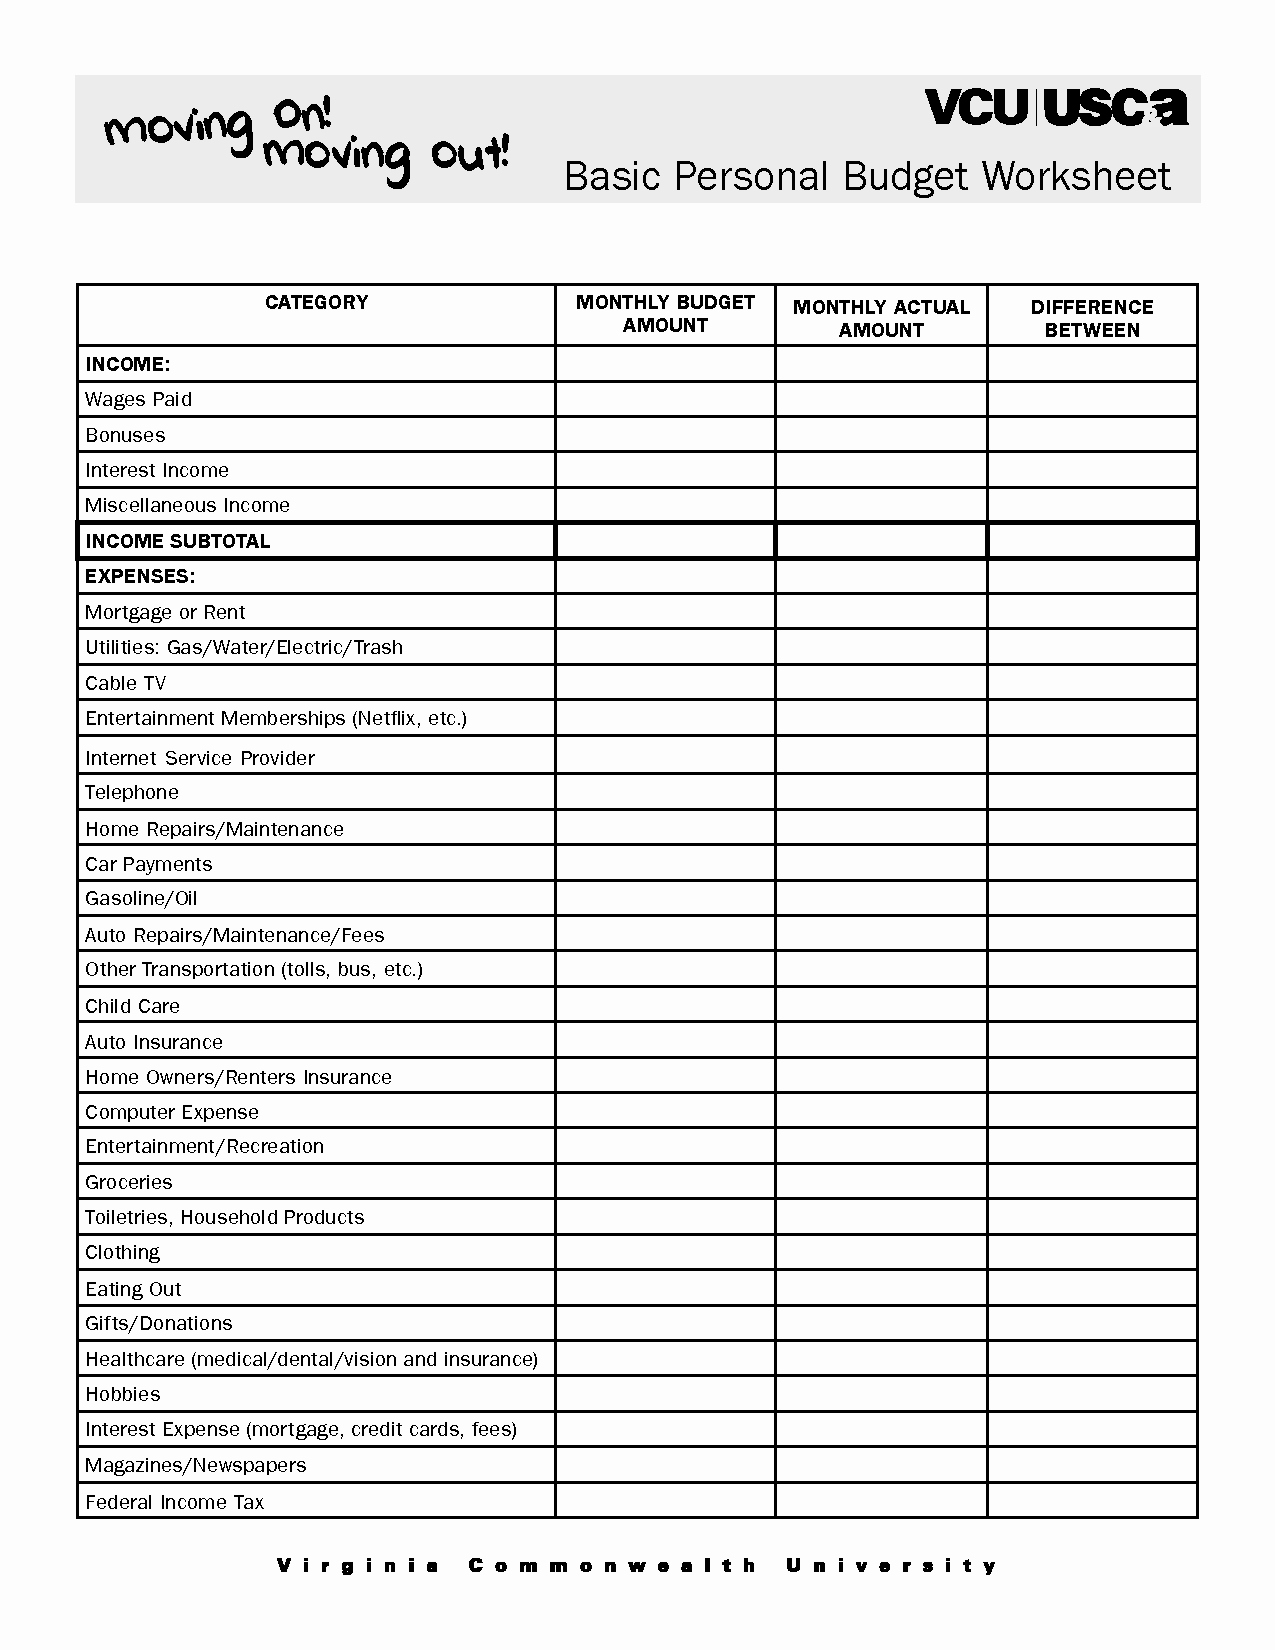 Personal Bud Worksheet Template Free 5 Best Images Of